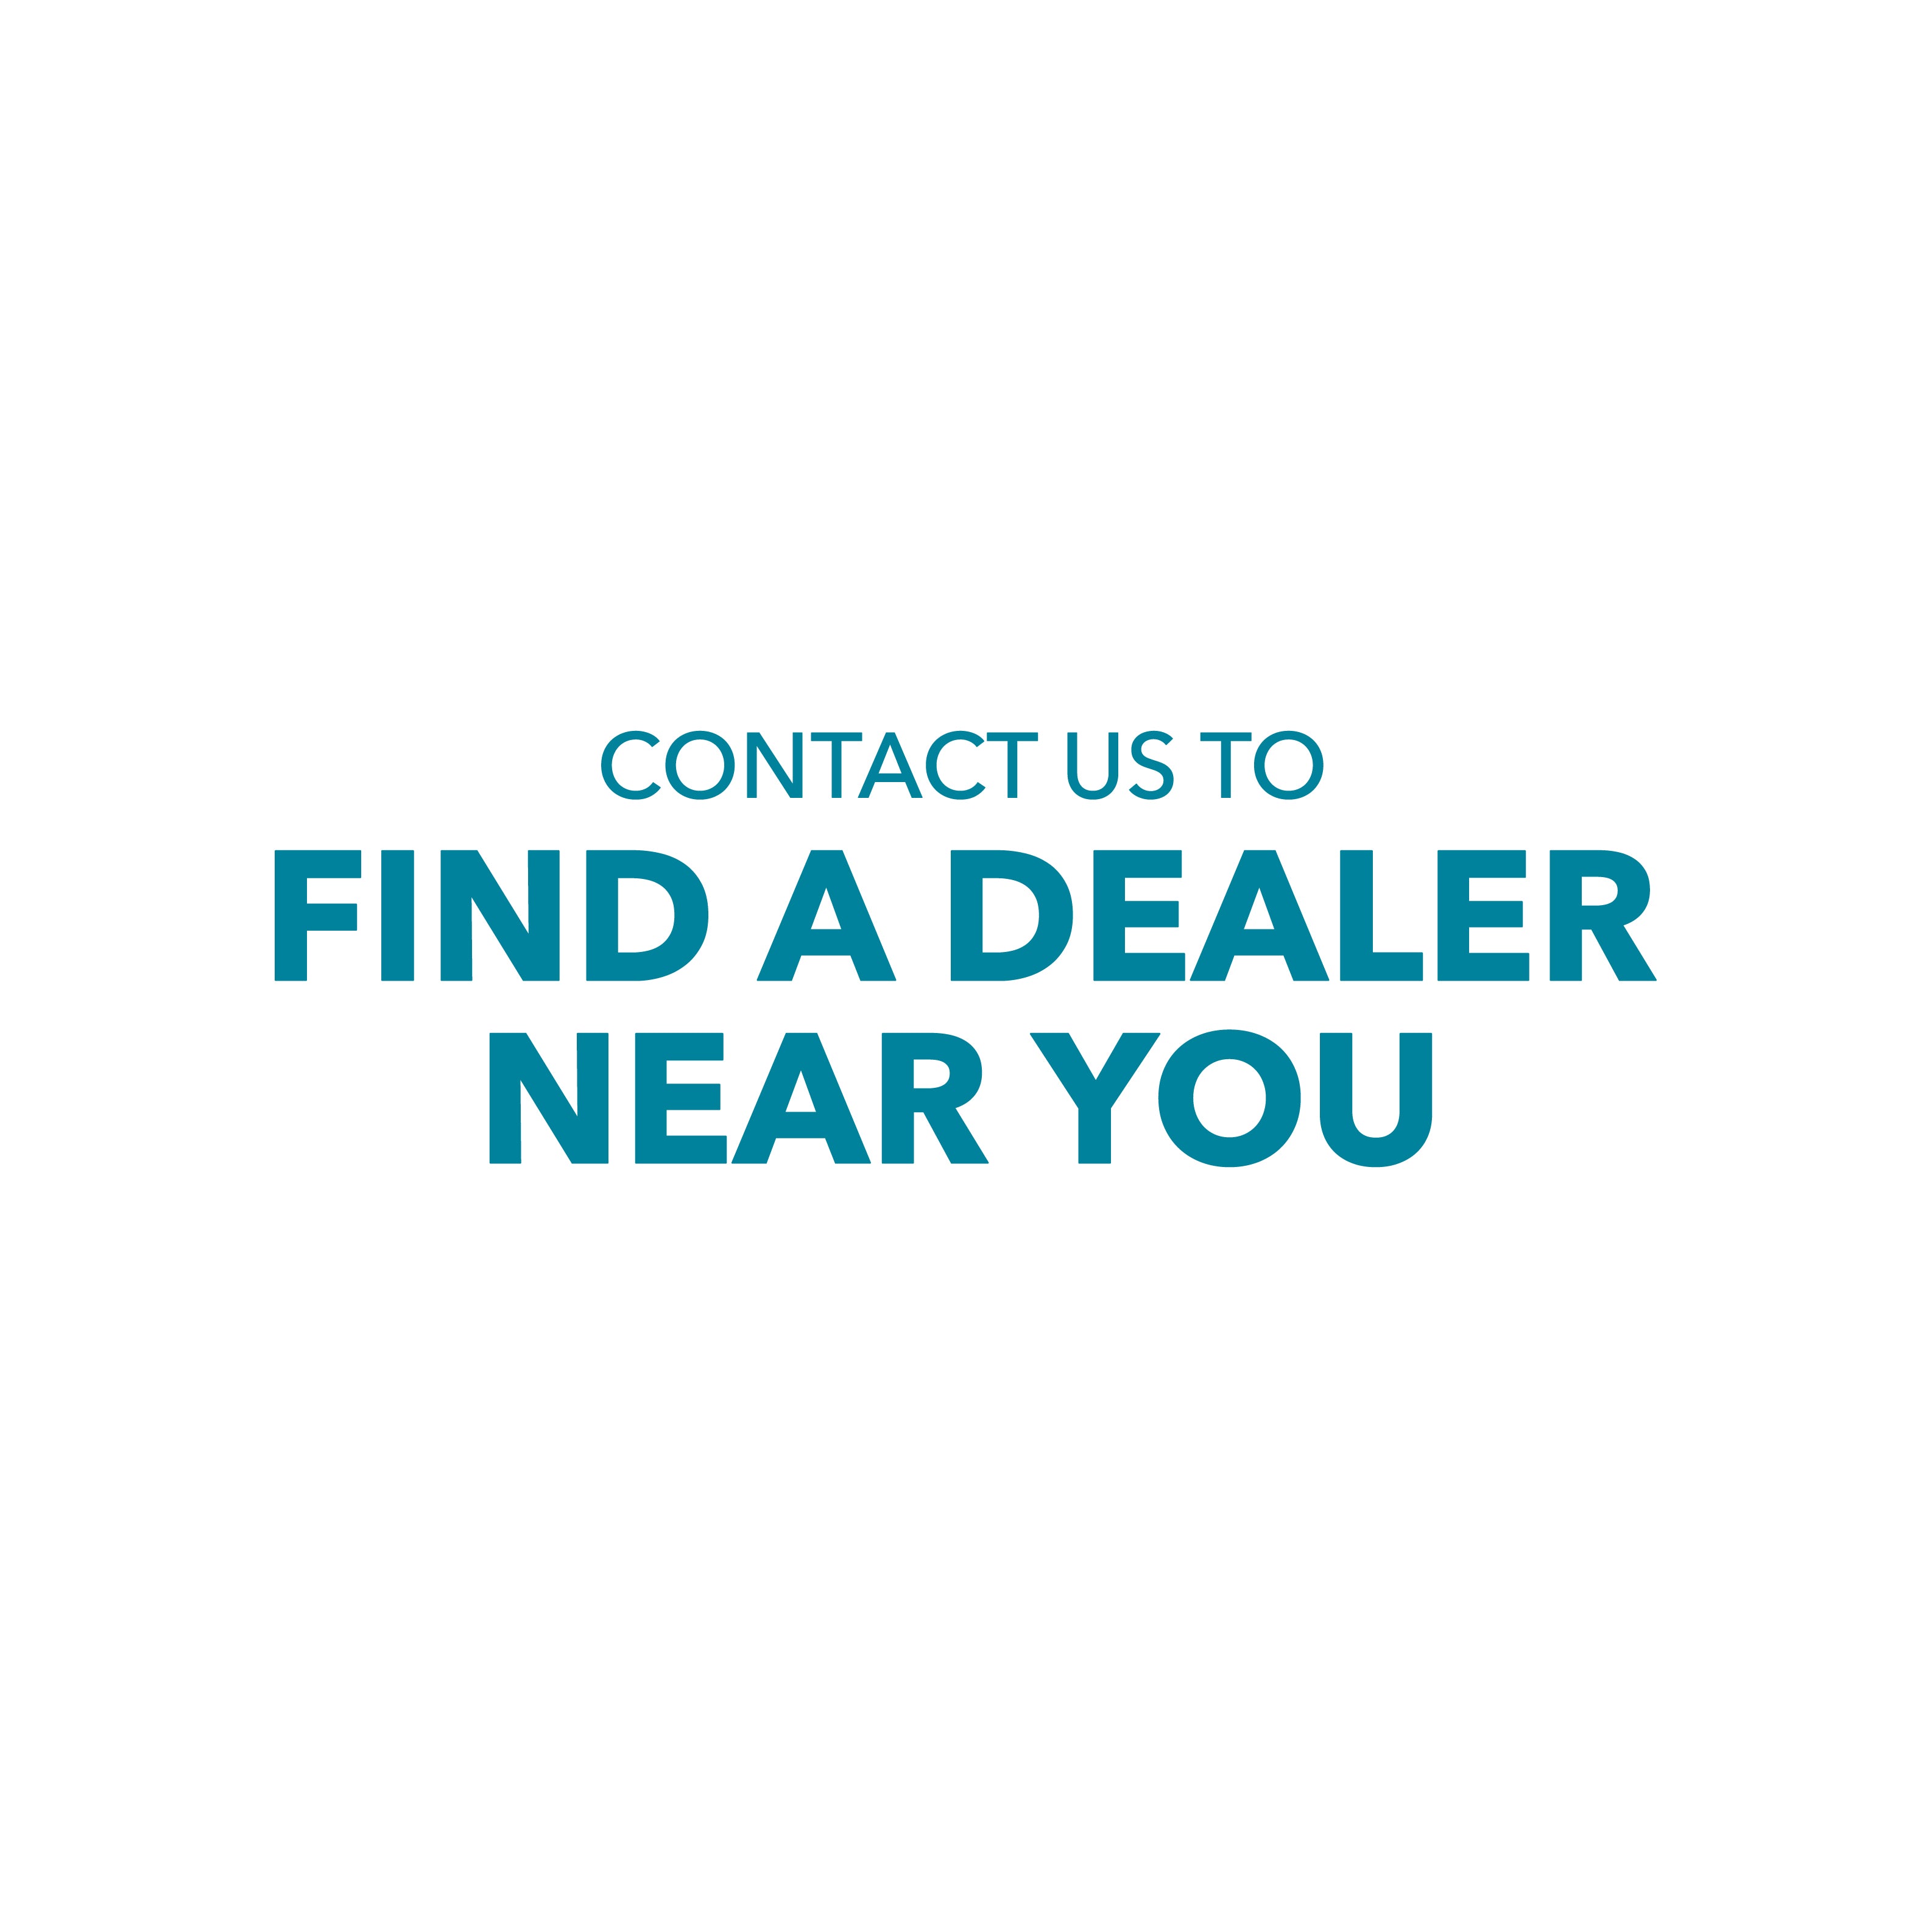 Contact us to find a dealer near you